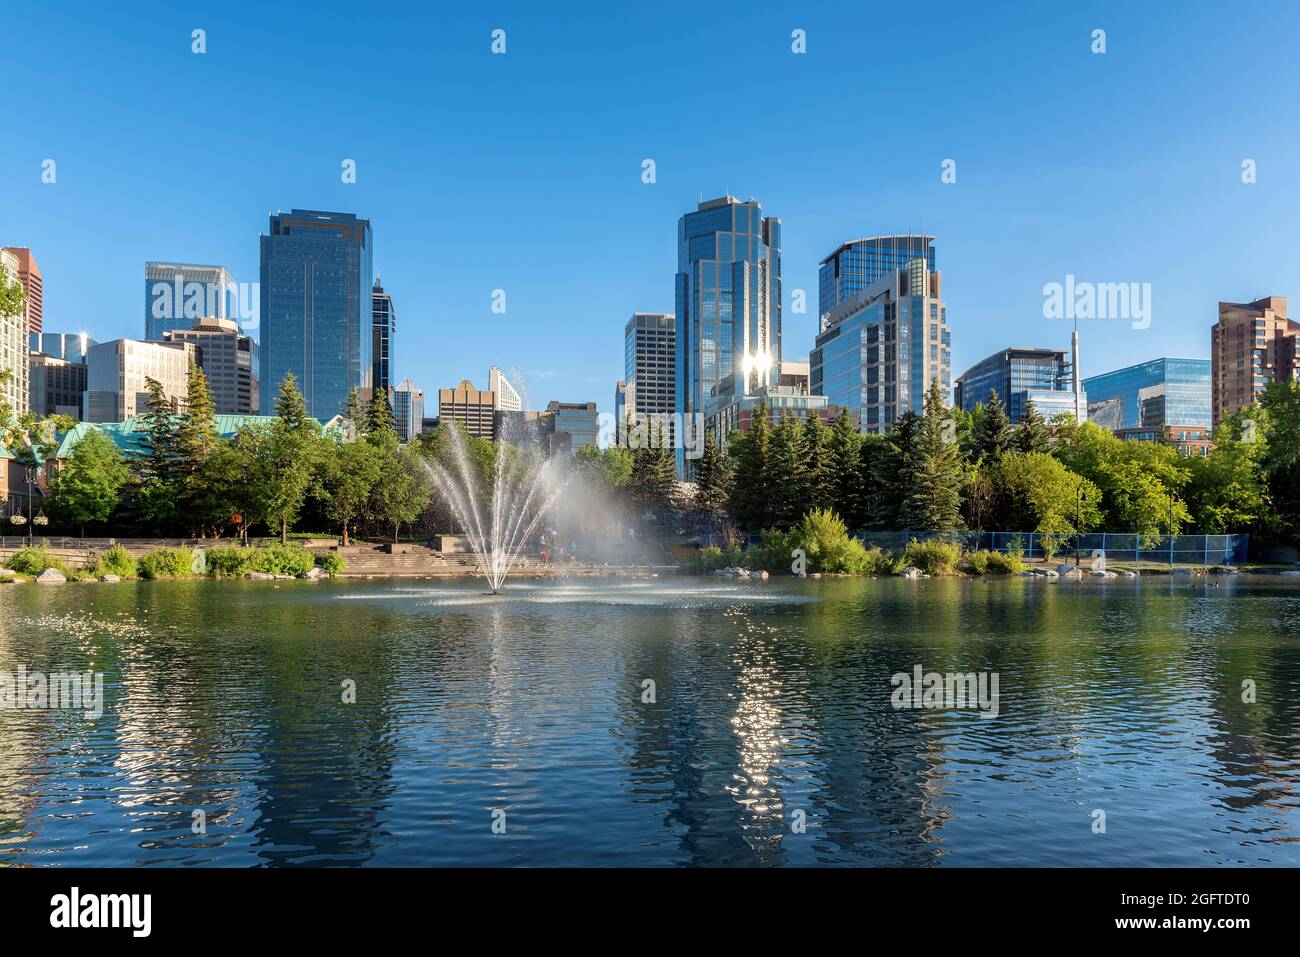 Calgary skyline with Bow river and downtown skyscrapers in Calgary, Alberta, Canada. Stock Photo